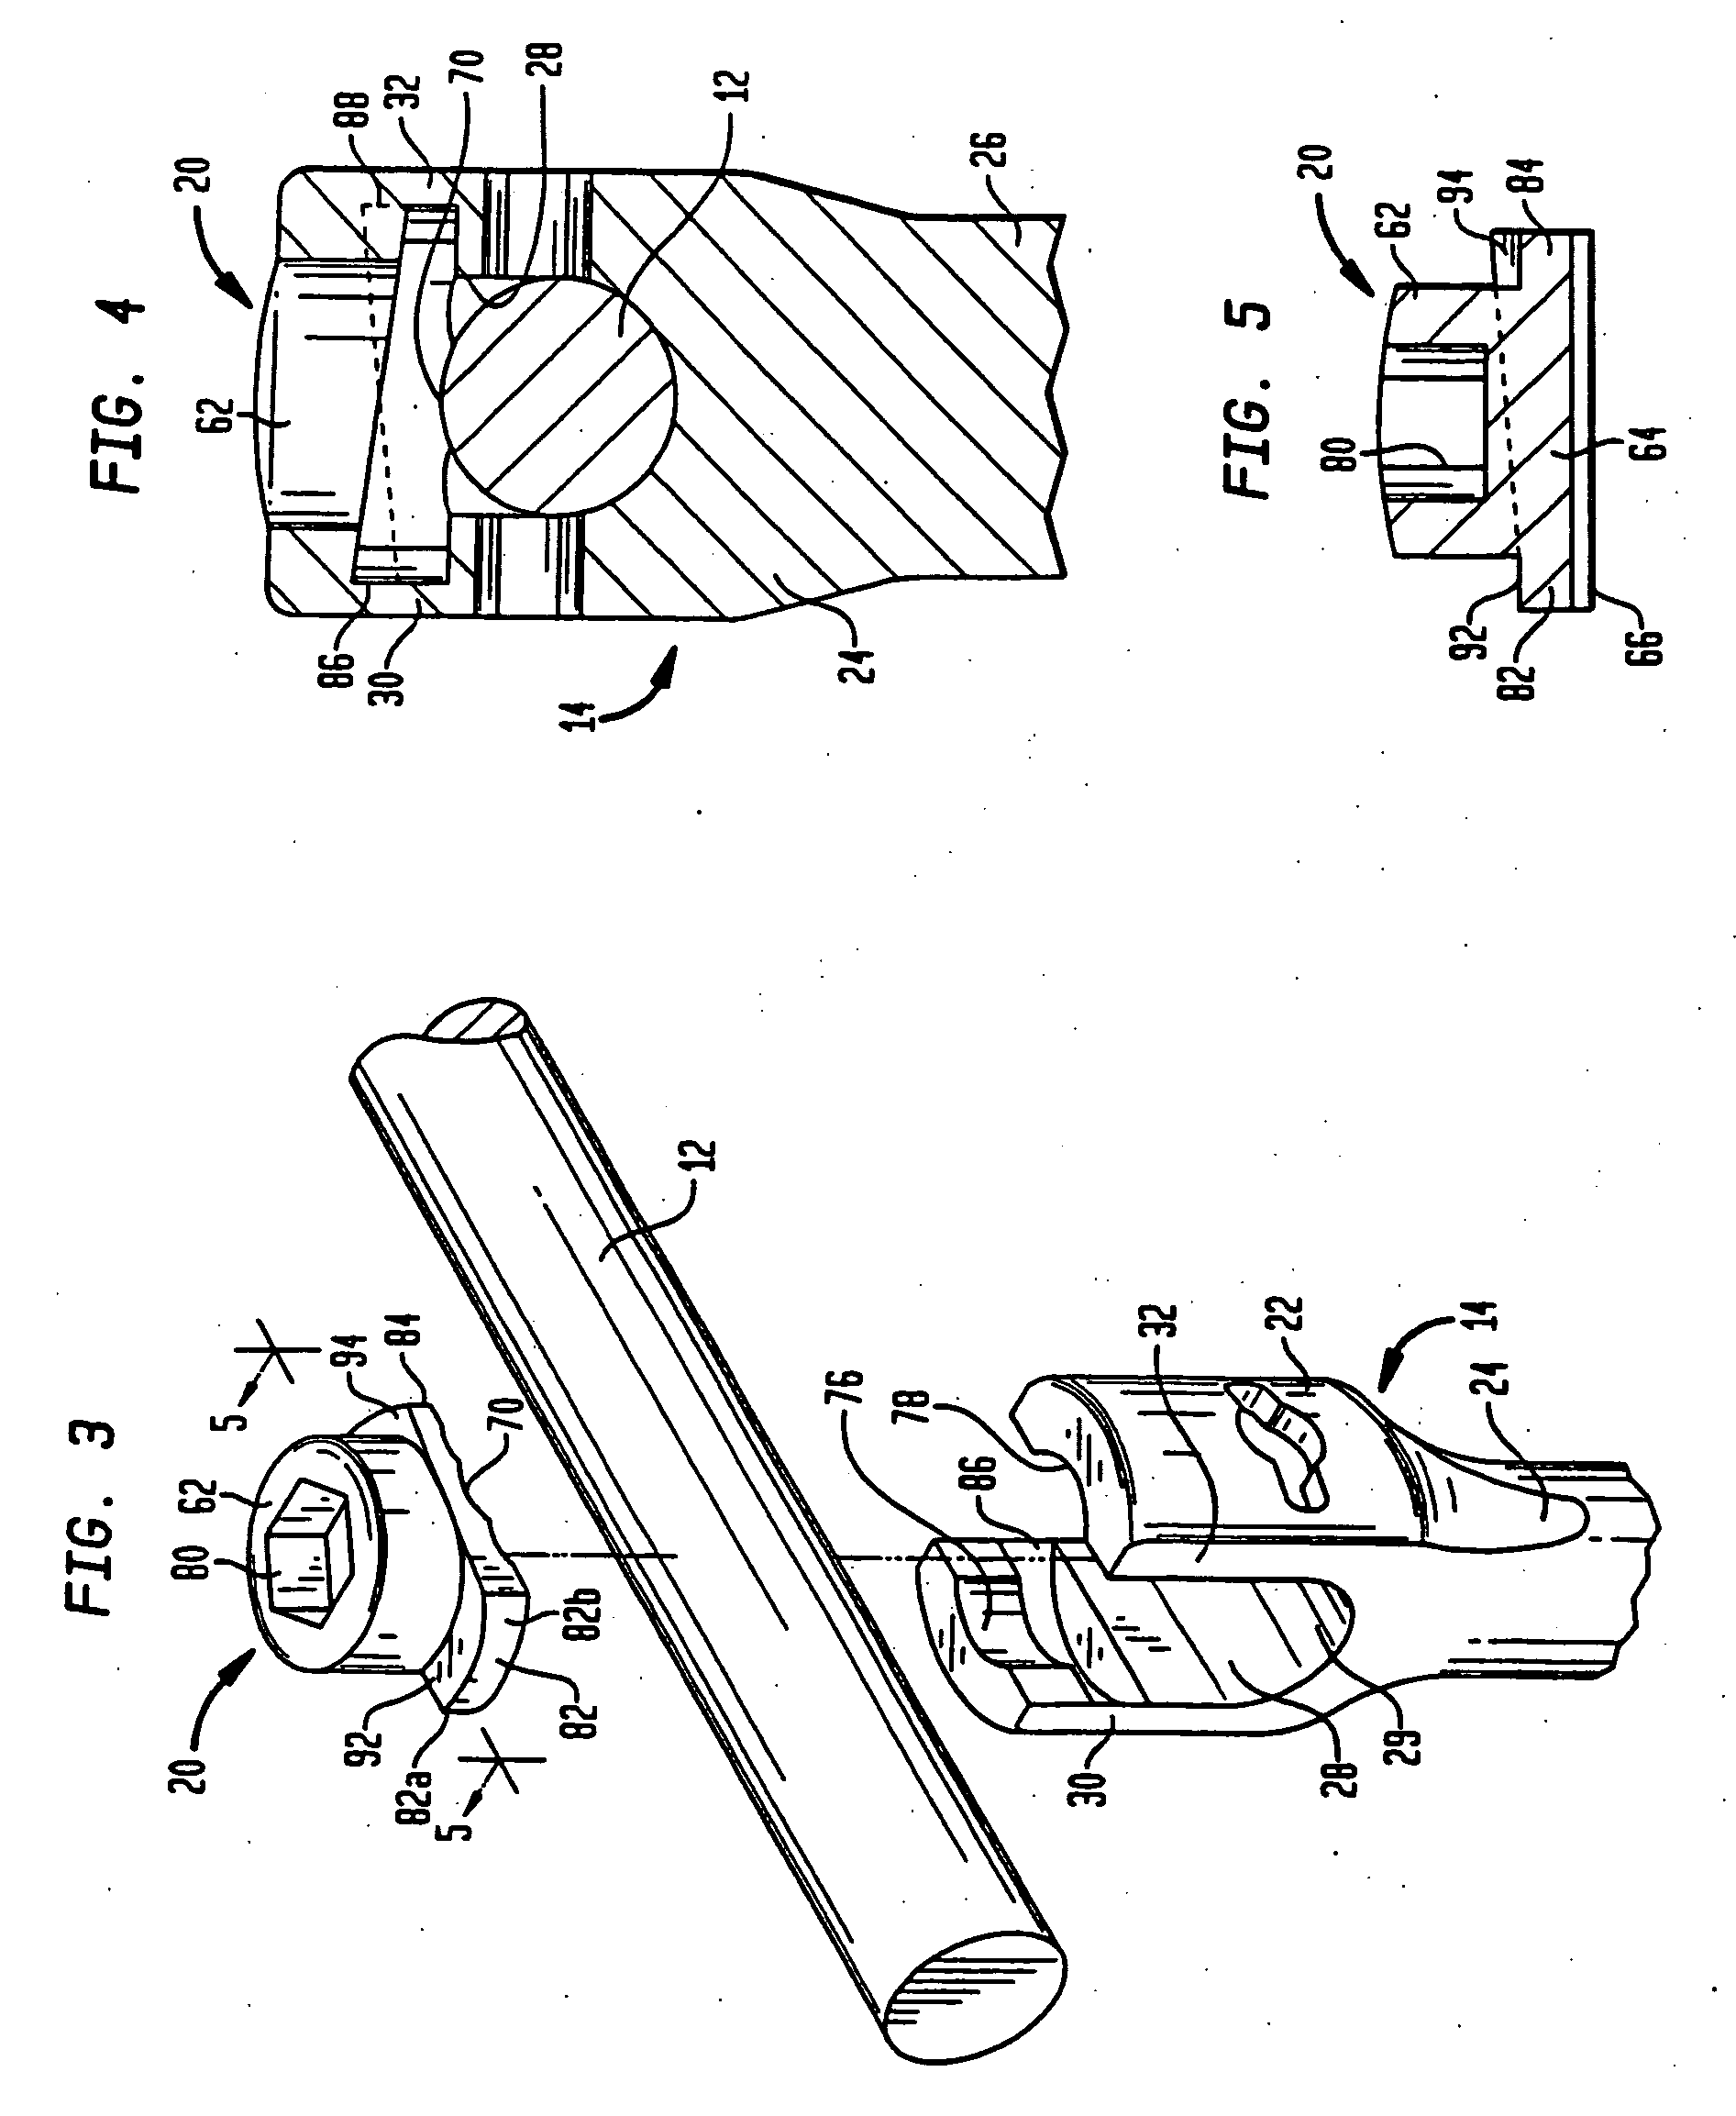 Methods for securing spinal rods